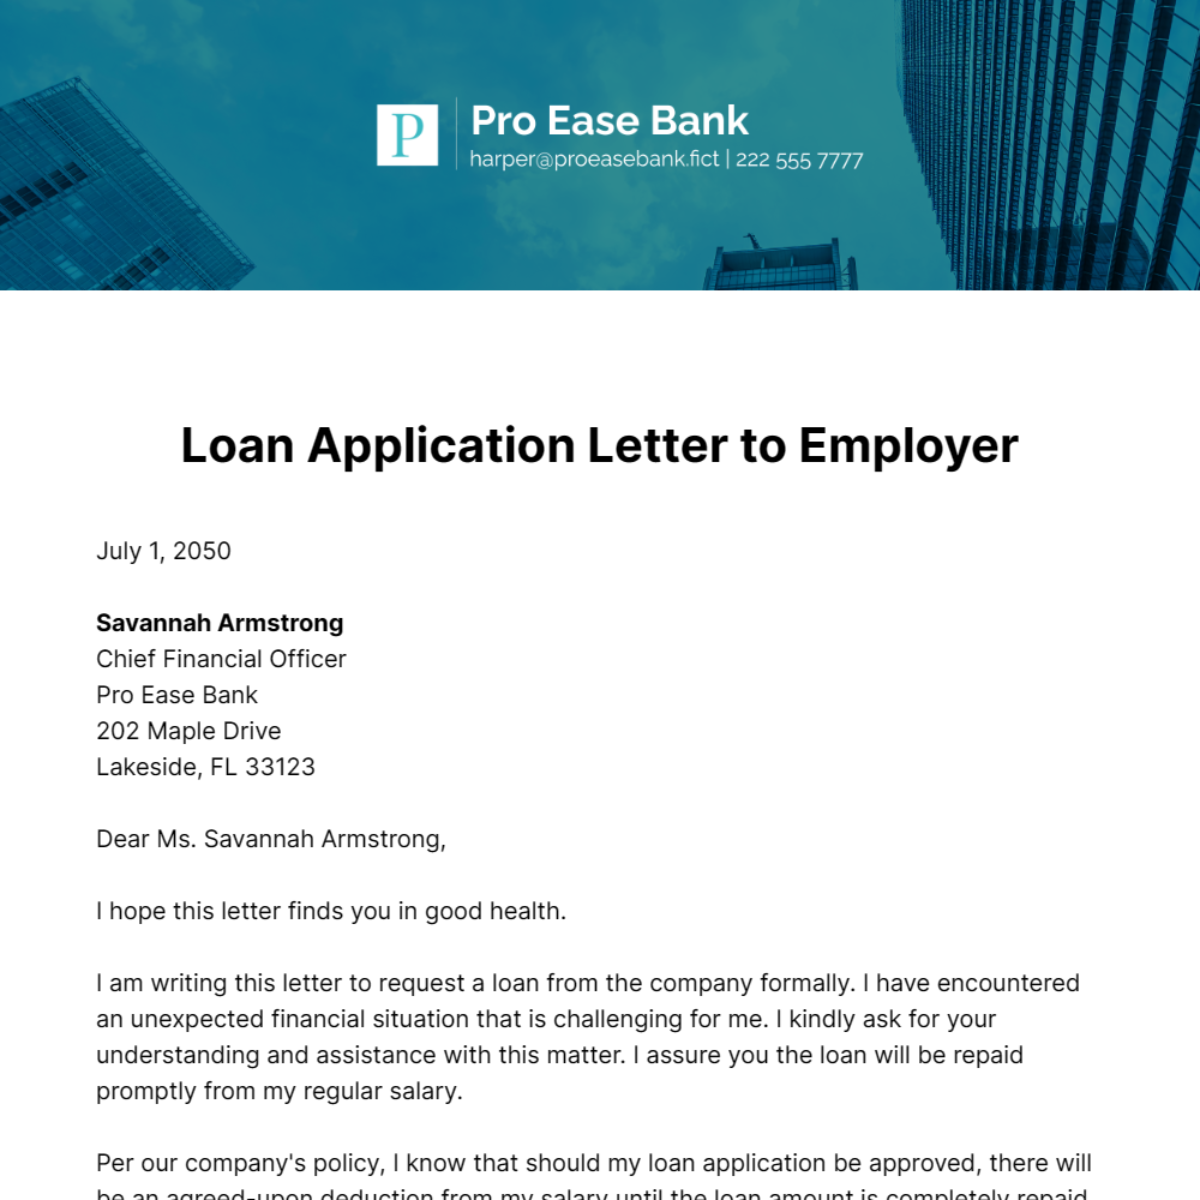 Loan Application Letter to Employer Template